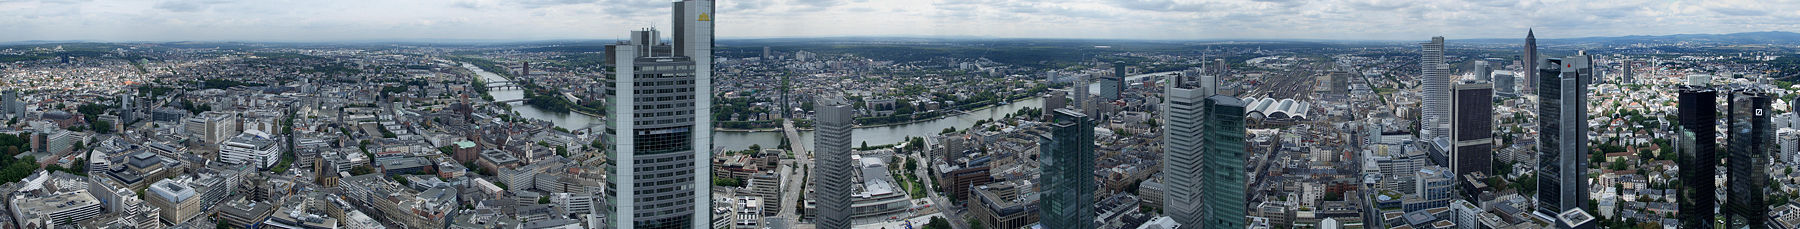 Panorama of Frankfurt seen from the Maintower observation deck